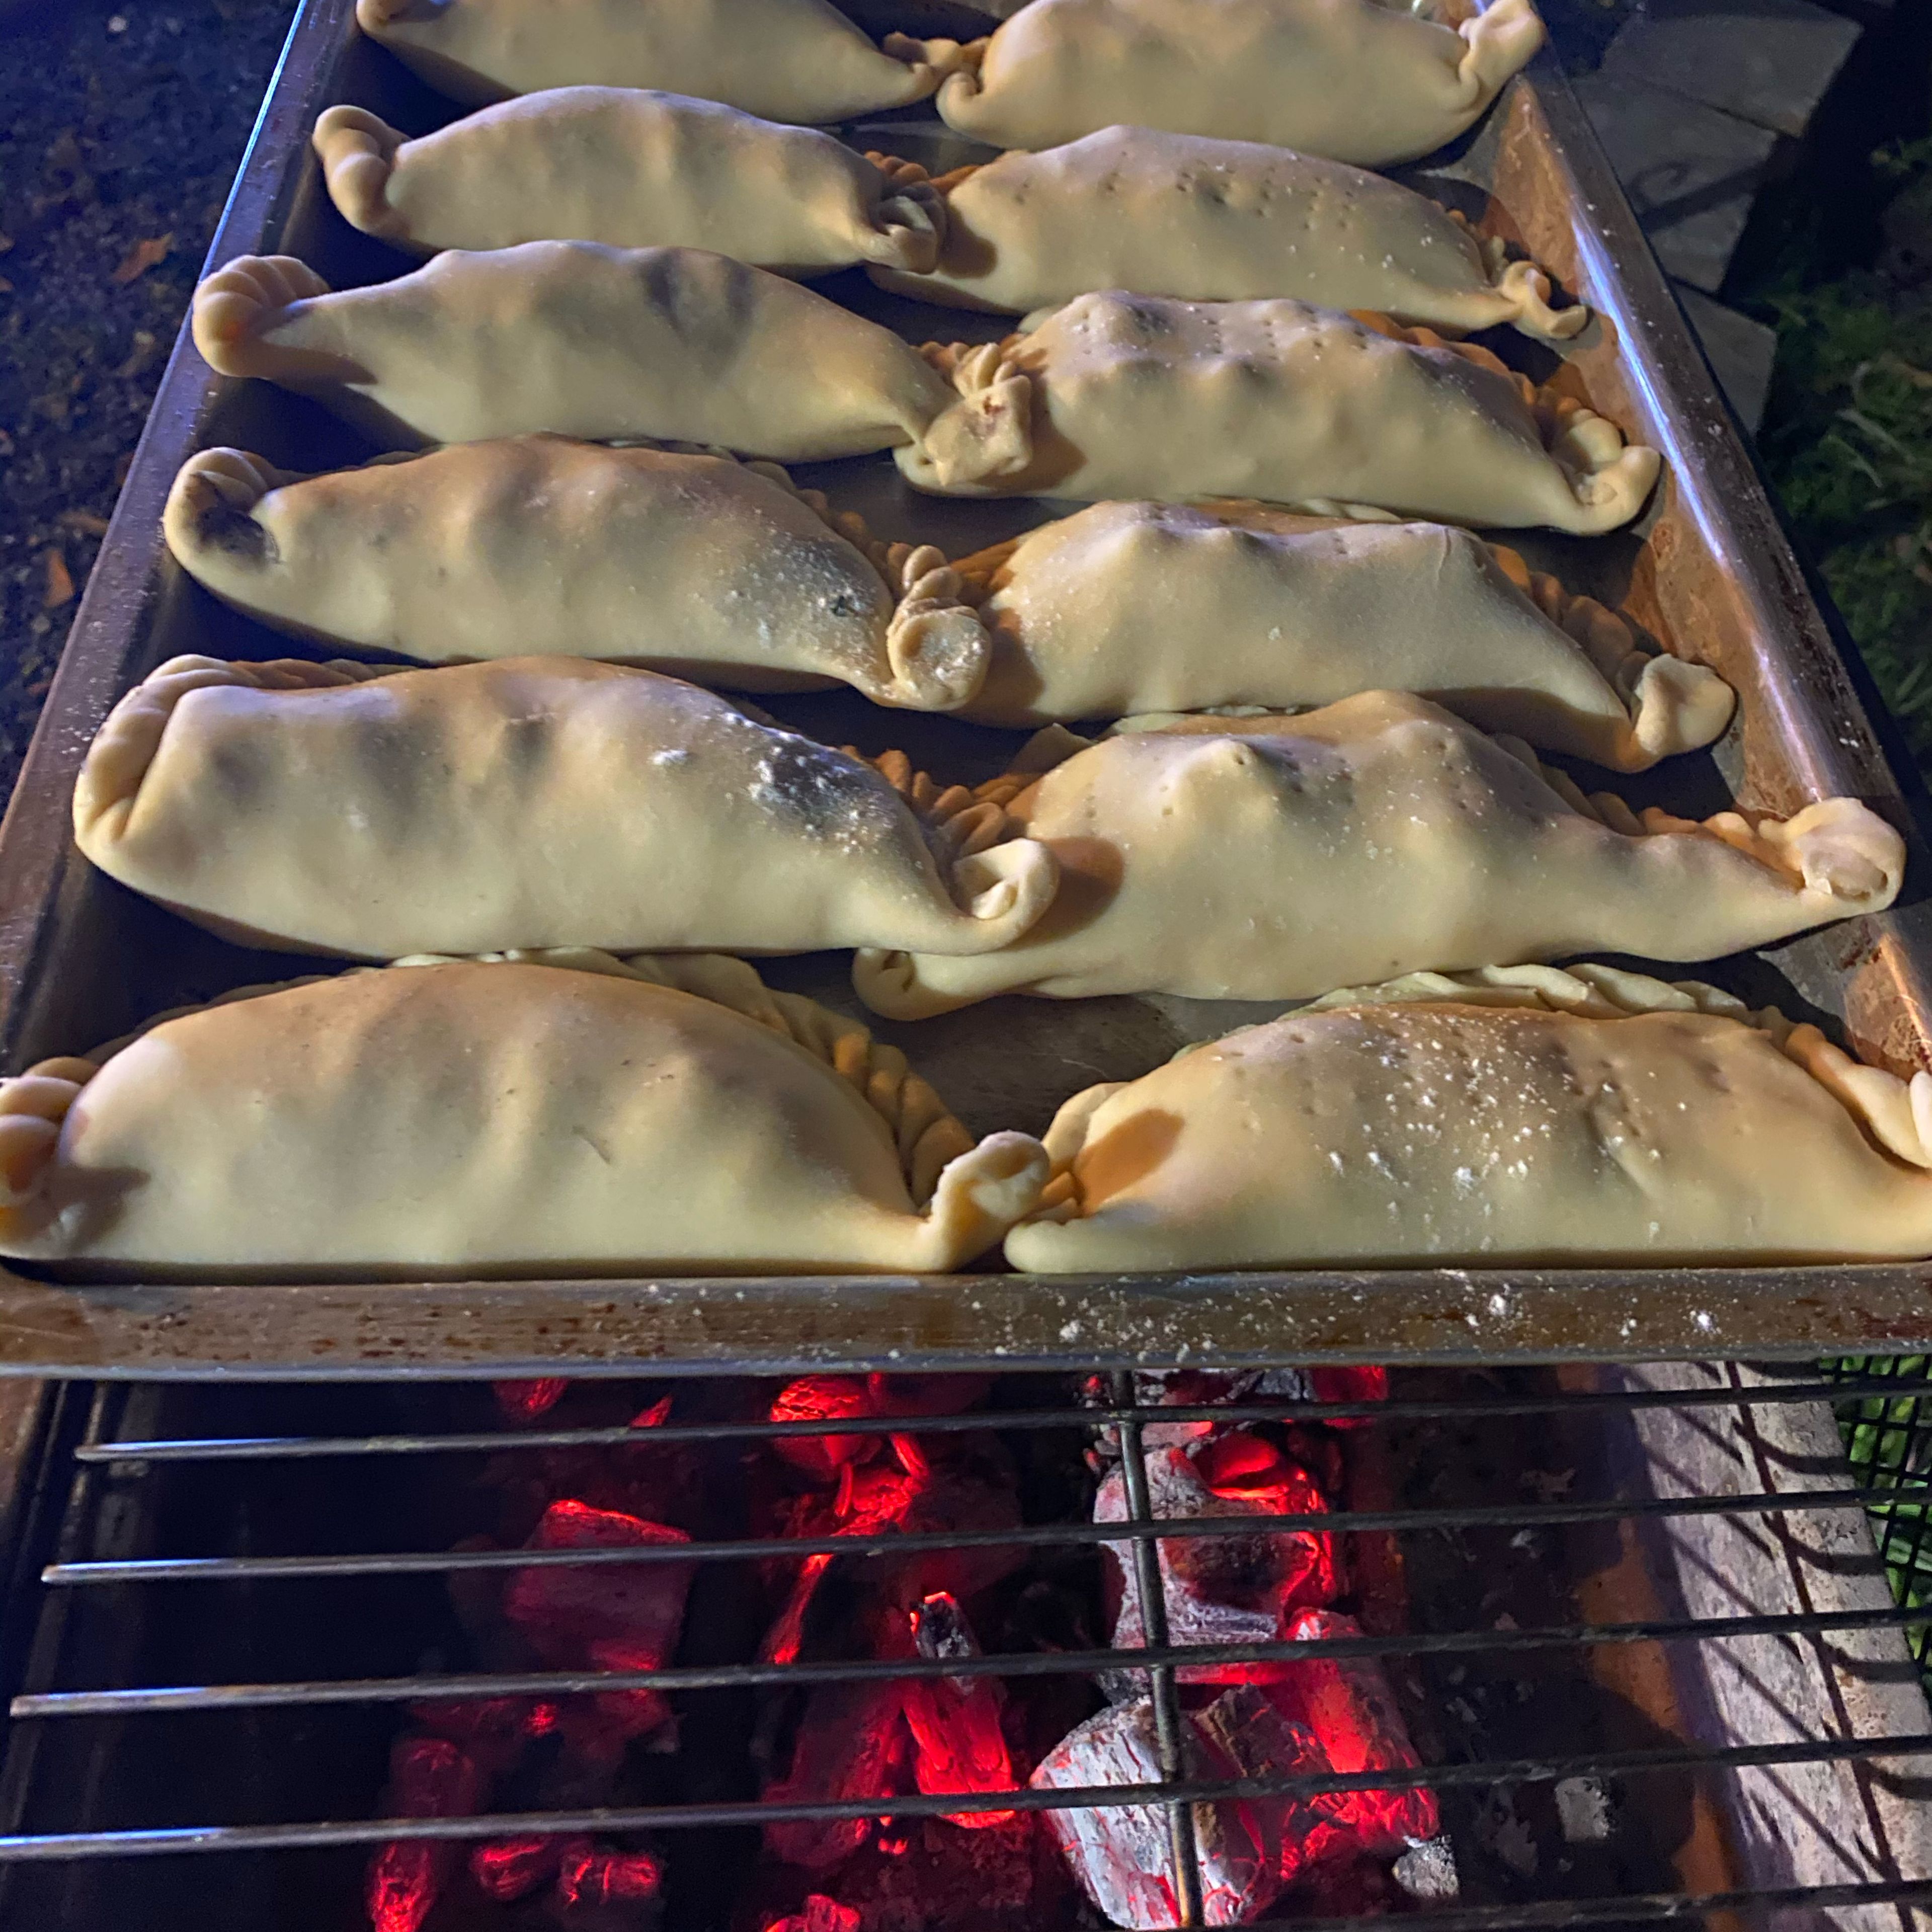 Grilled Empanadas:

put them directly on the grill of your campfire for 3-5 minutes depending on its temperature.Remove, let cool down and enjoy!